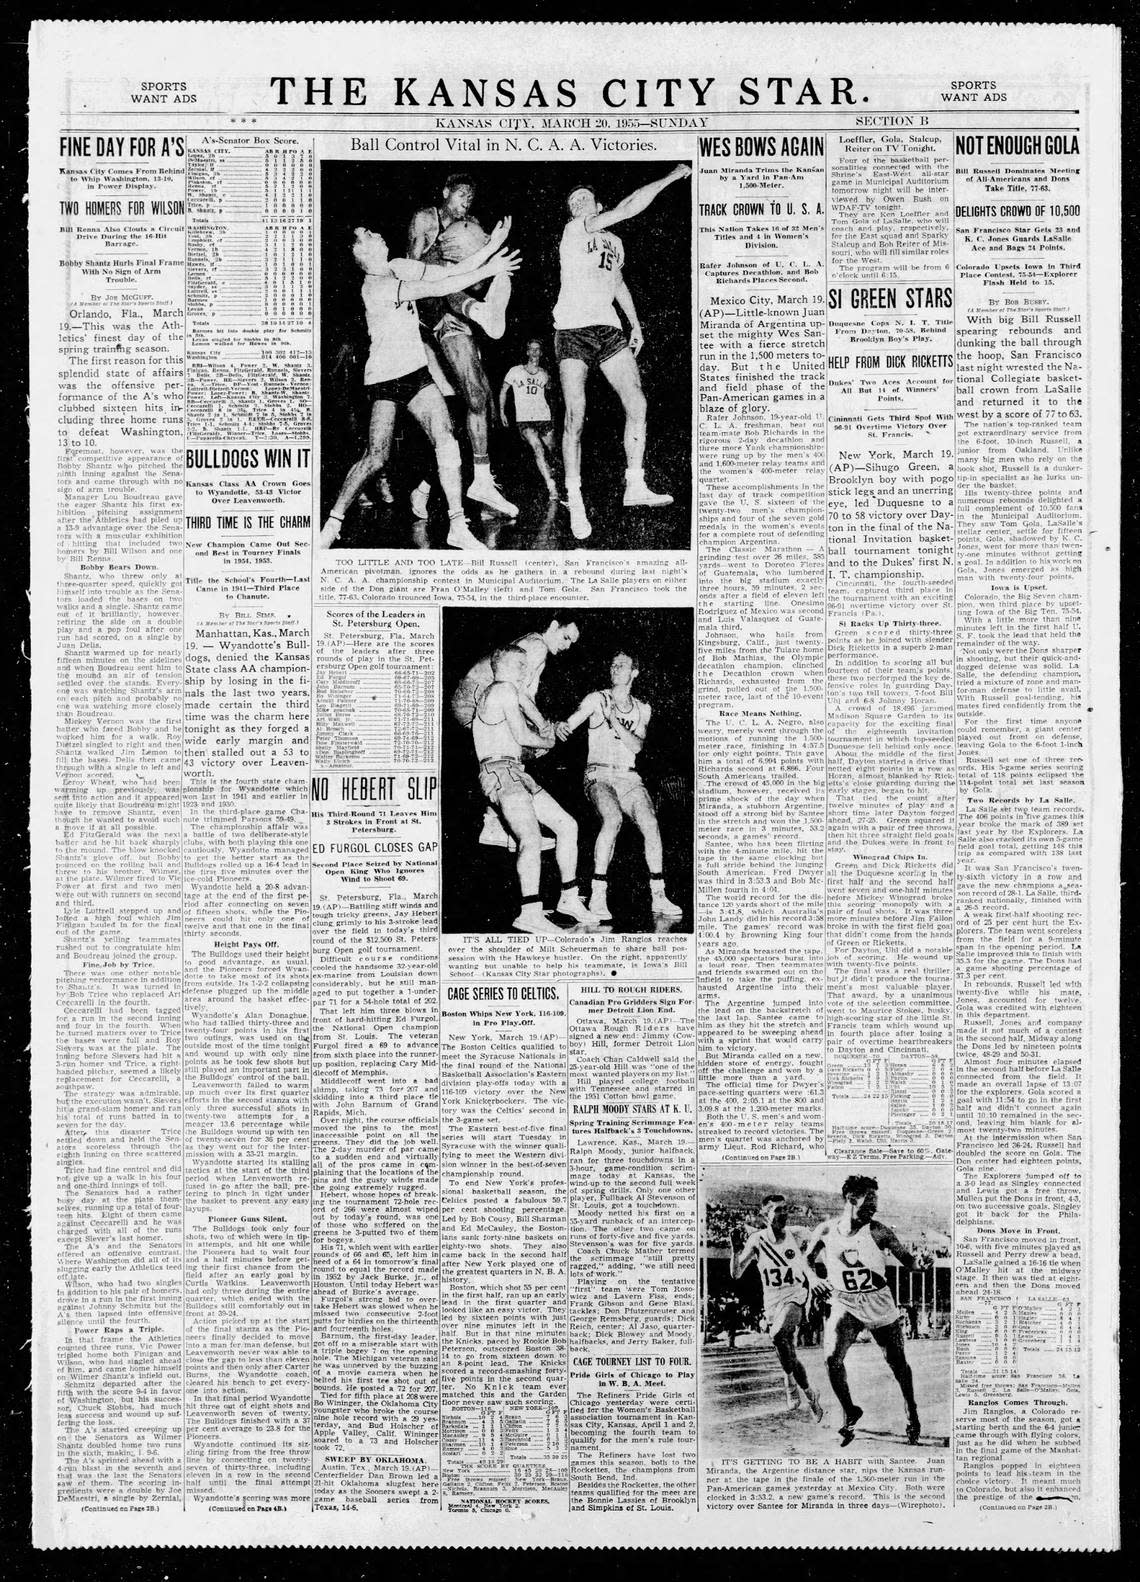 The front page of The Kansas City Star sports section on March 20, 1955, the day after Bill Russell’s San Francisco team beat La Salle for the NCAA men’s basketball championship at Municipal Auditorium.